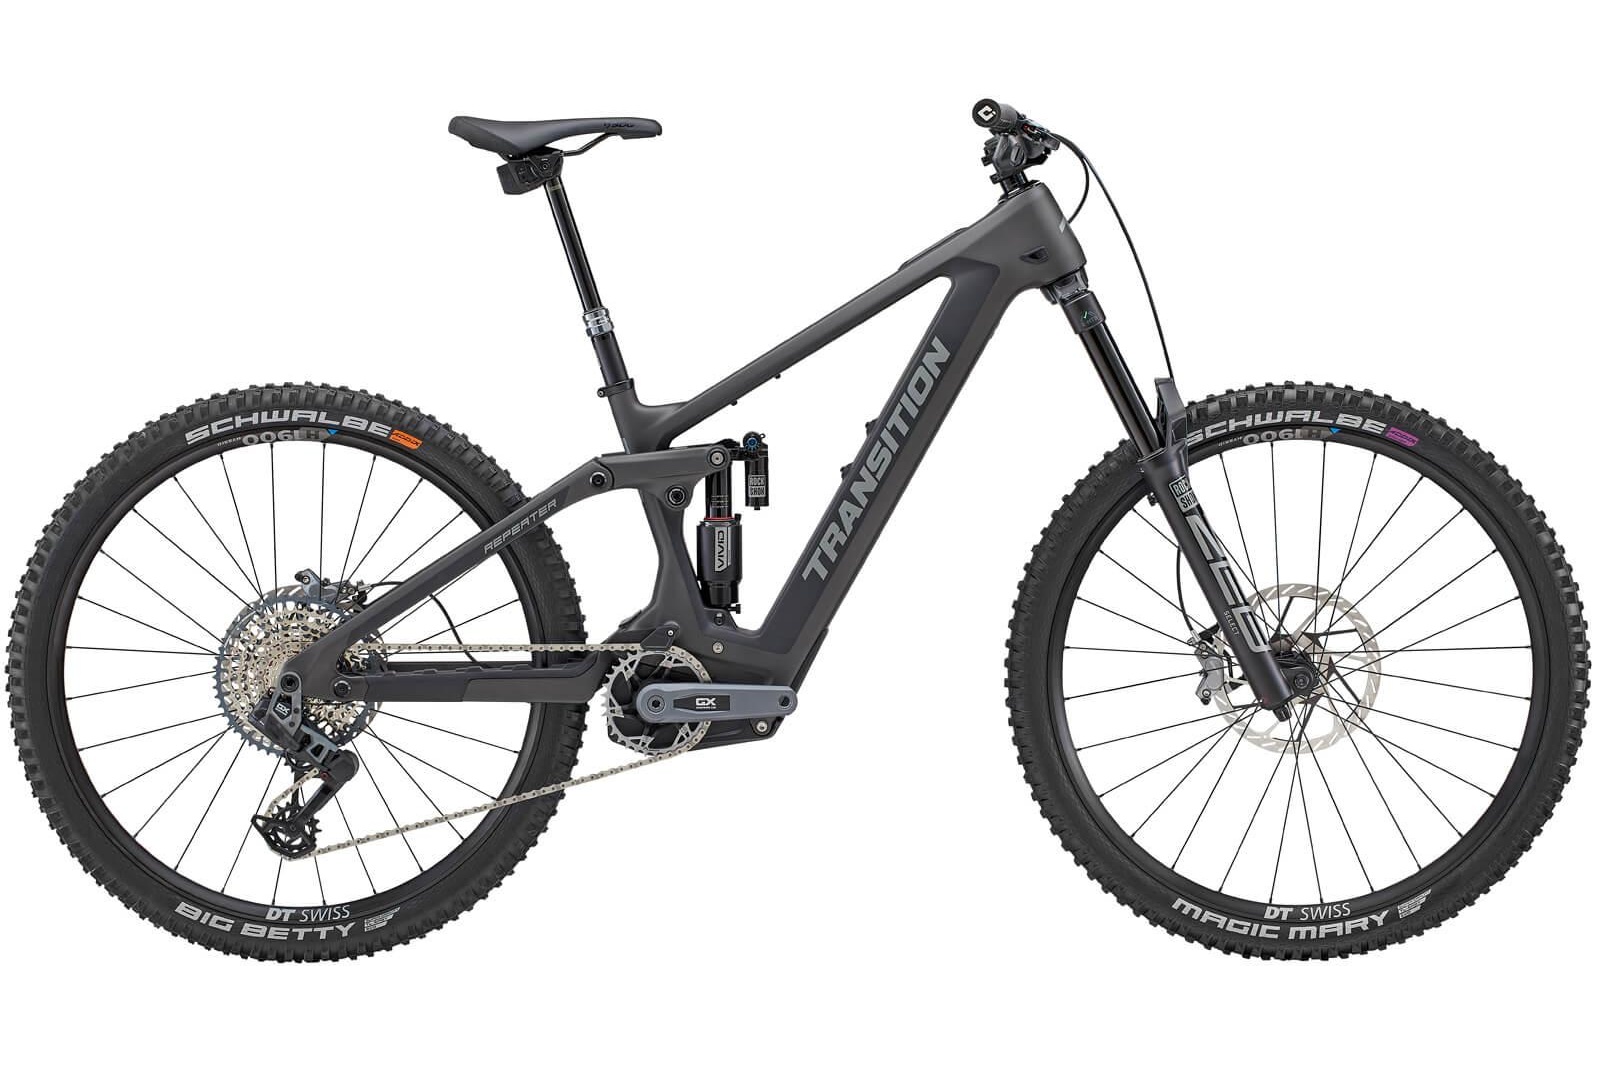 Transition Repeater Carbon GX axs im Test